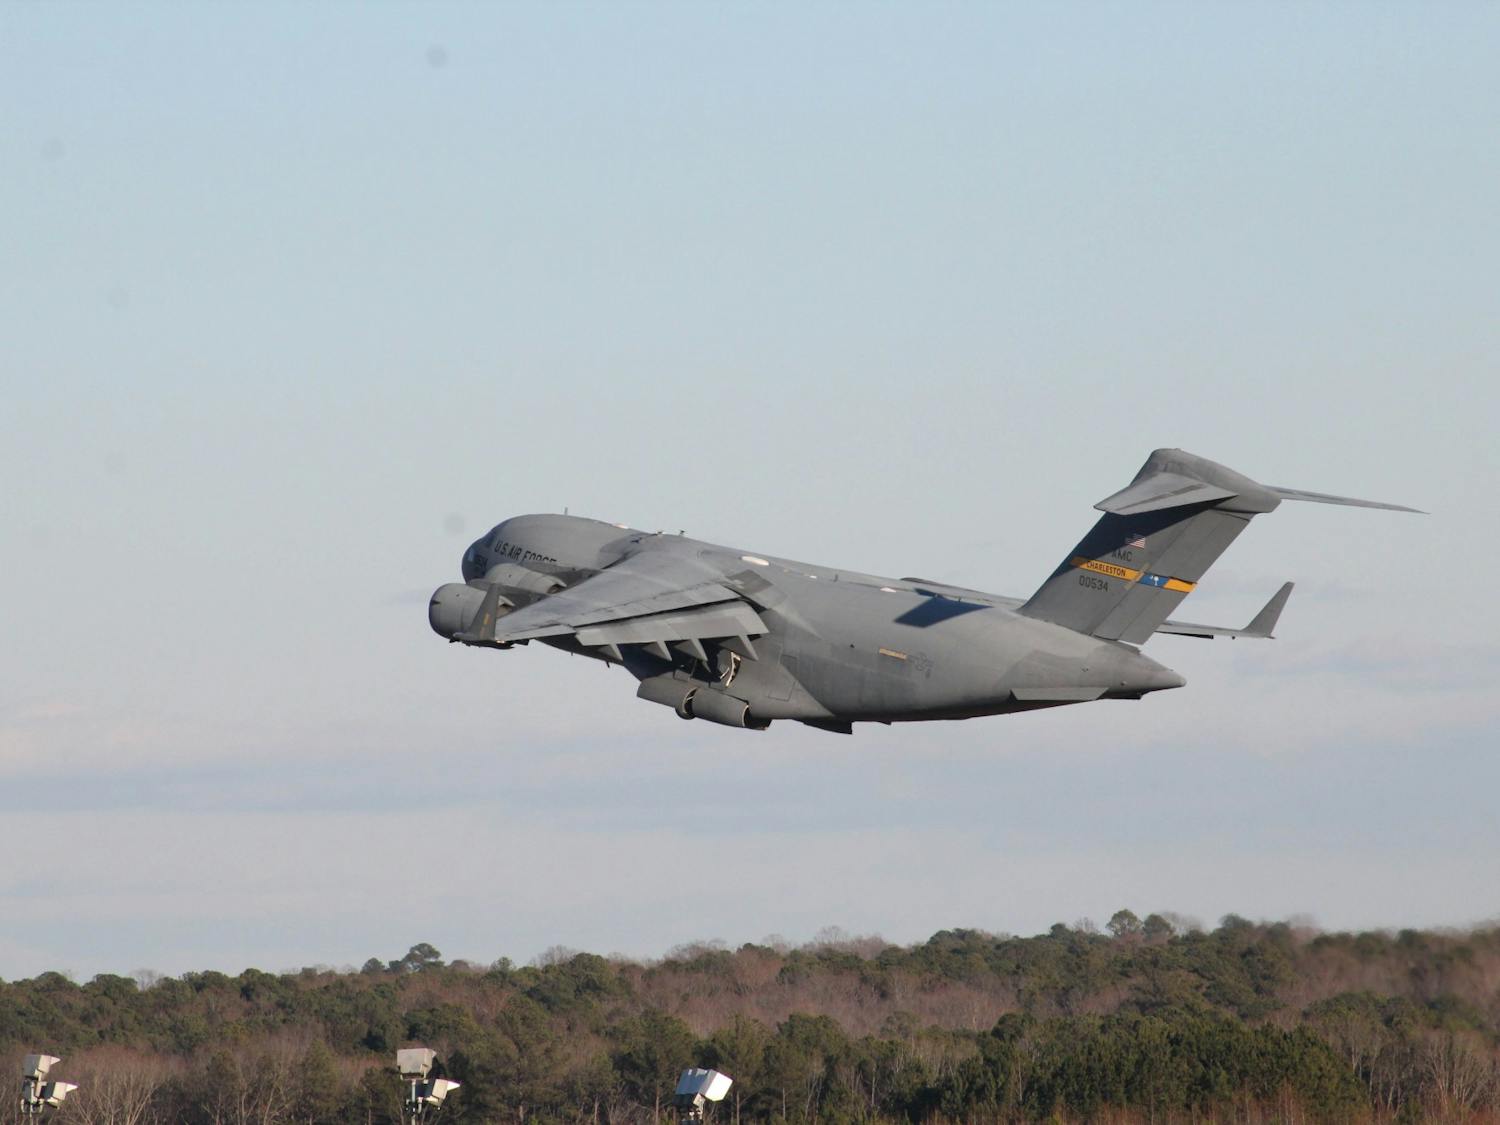 A US Air Force plane takes off at RDU on Jan. 29, 2022. 